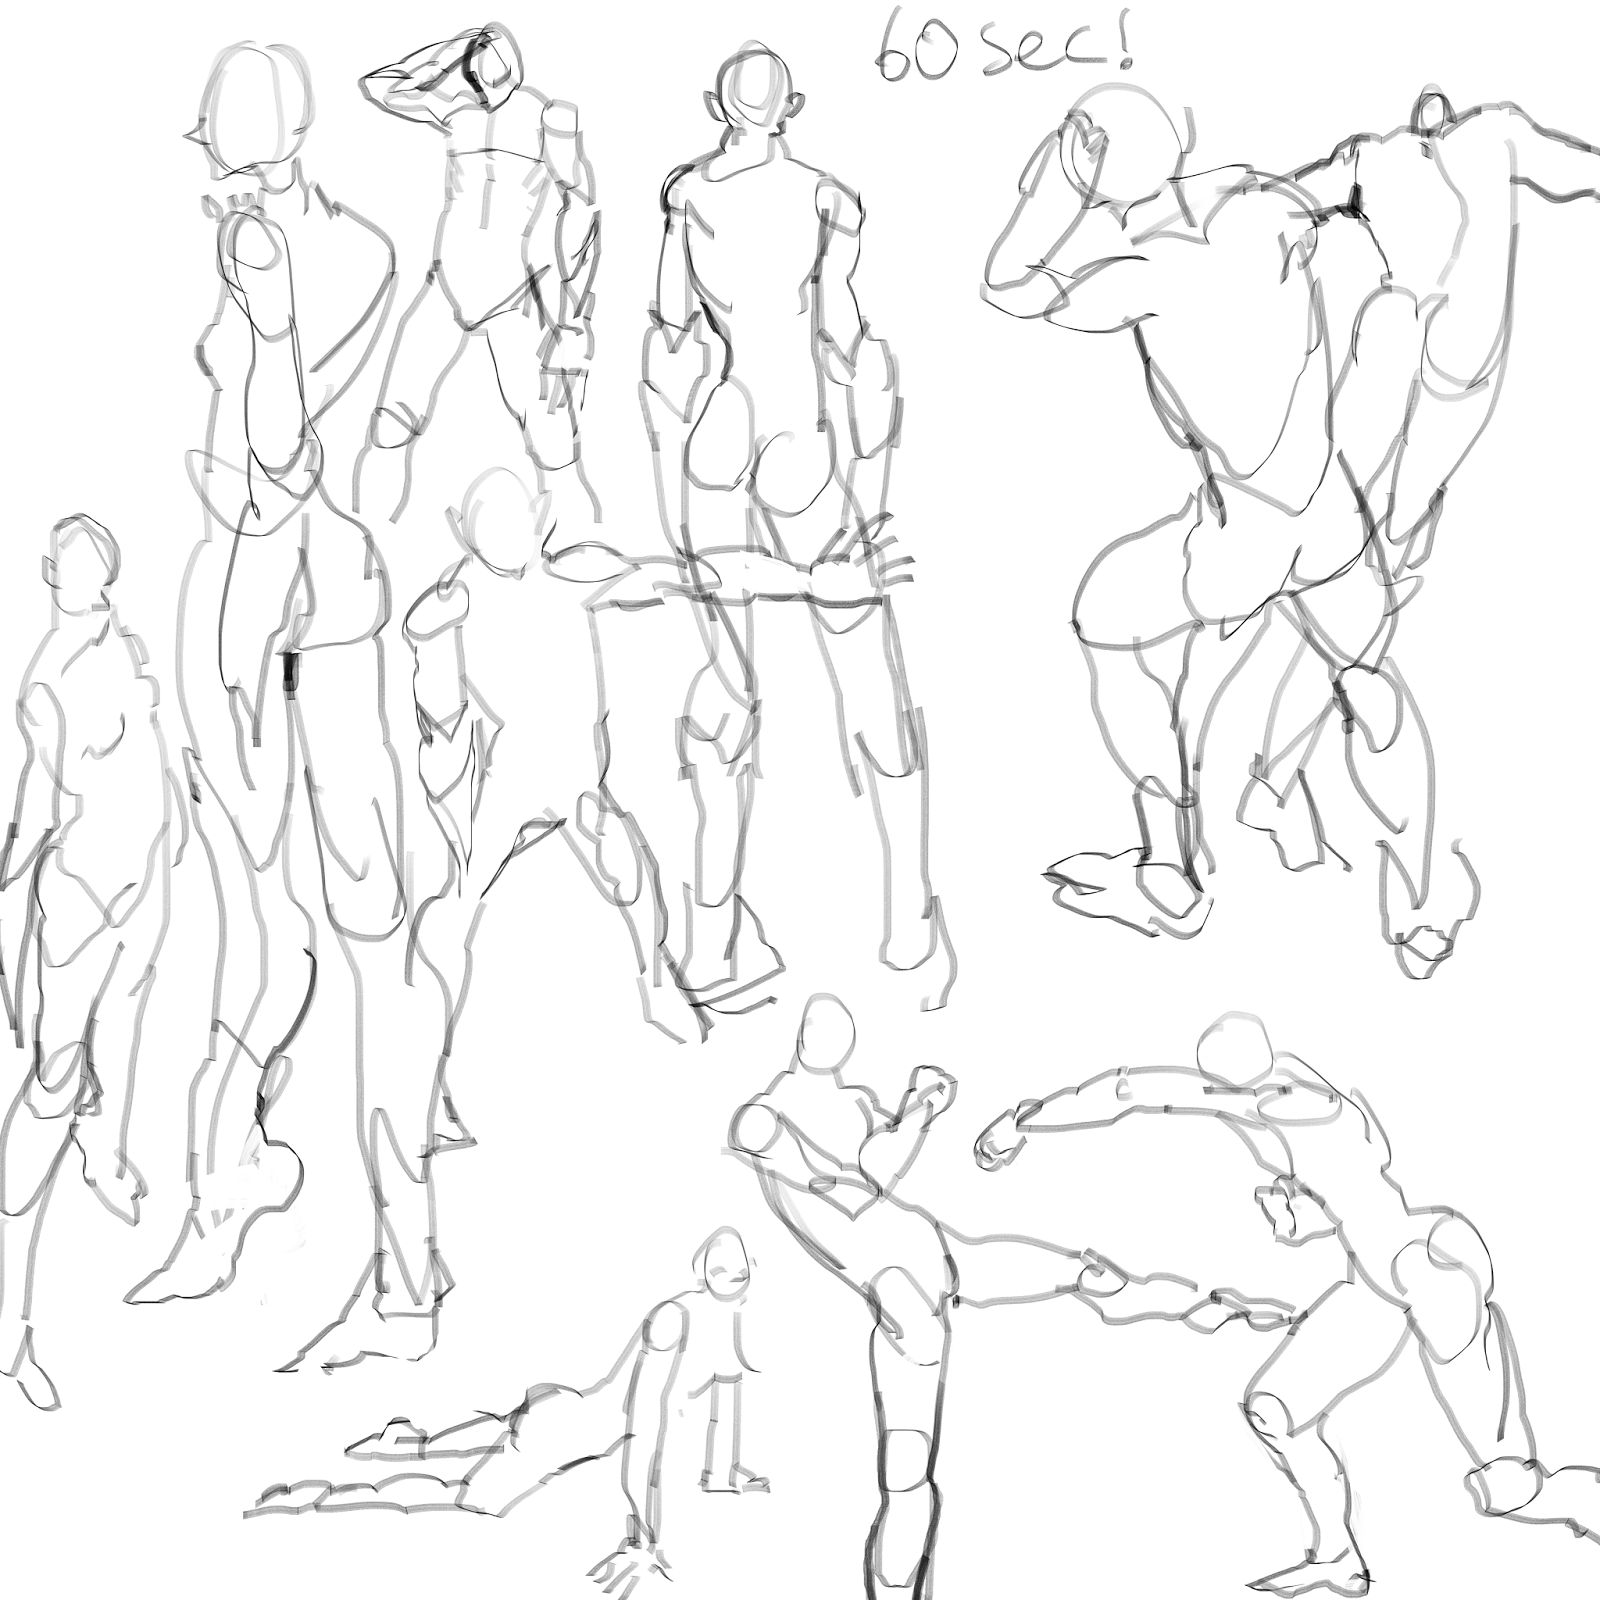 Suggestive drawing poses